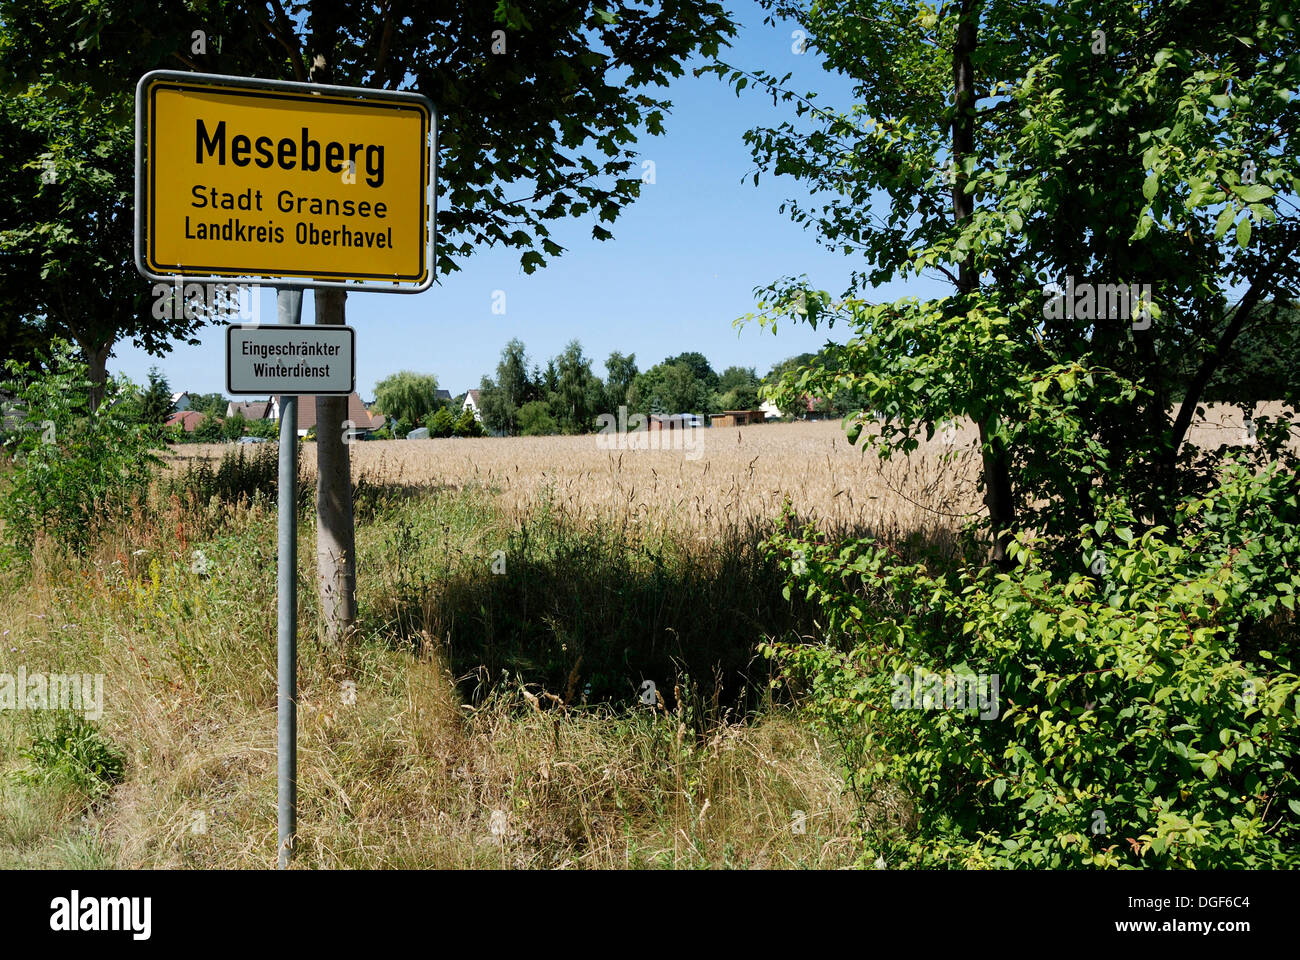 Signpost for Meseberg on the road to the Federal government guesthouse Meseberg Palace near Berlin. Stock Photo